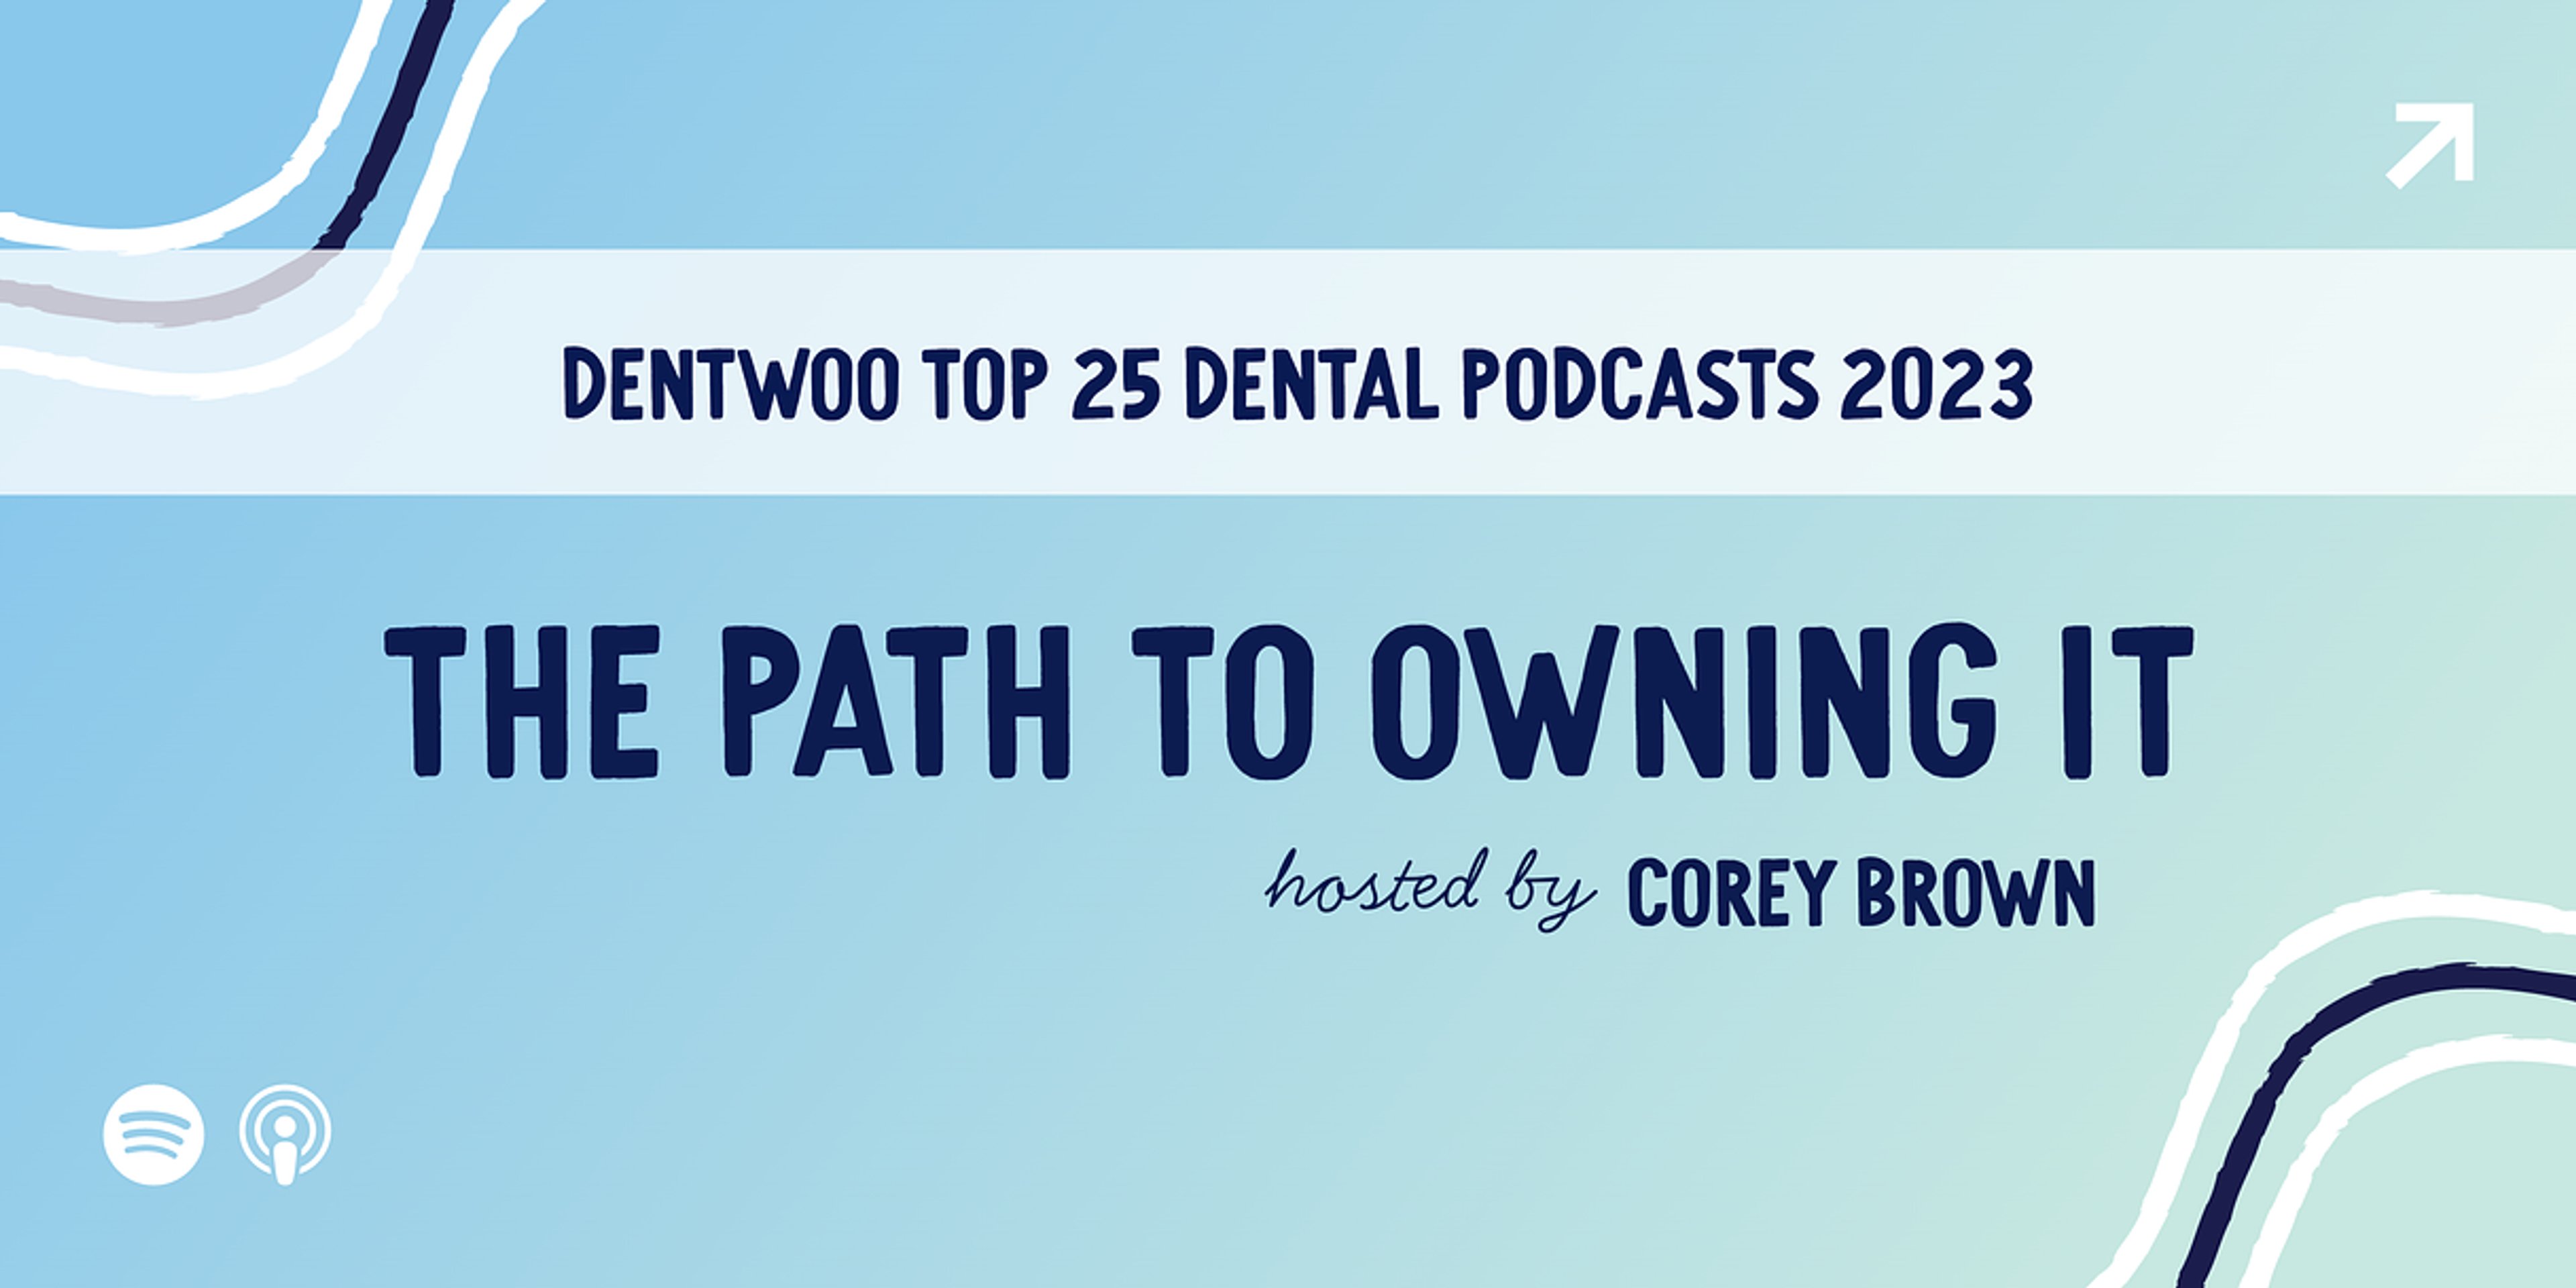 Image for Provide's podcast for healthcare practice owners makes DentWoo's list of top 25 podcasts for dentists